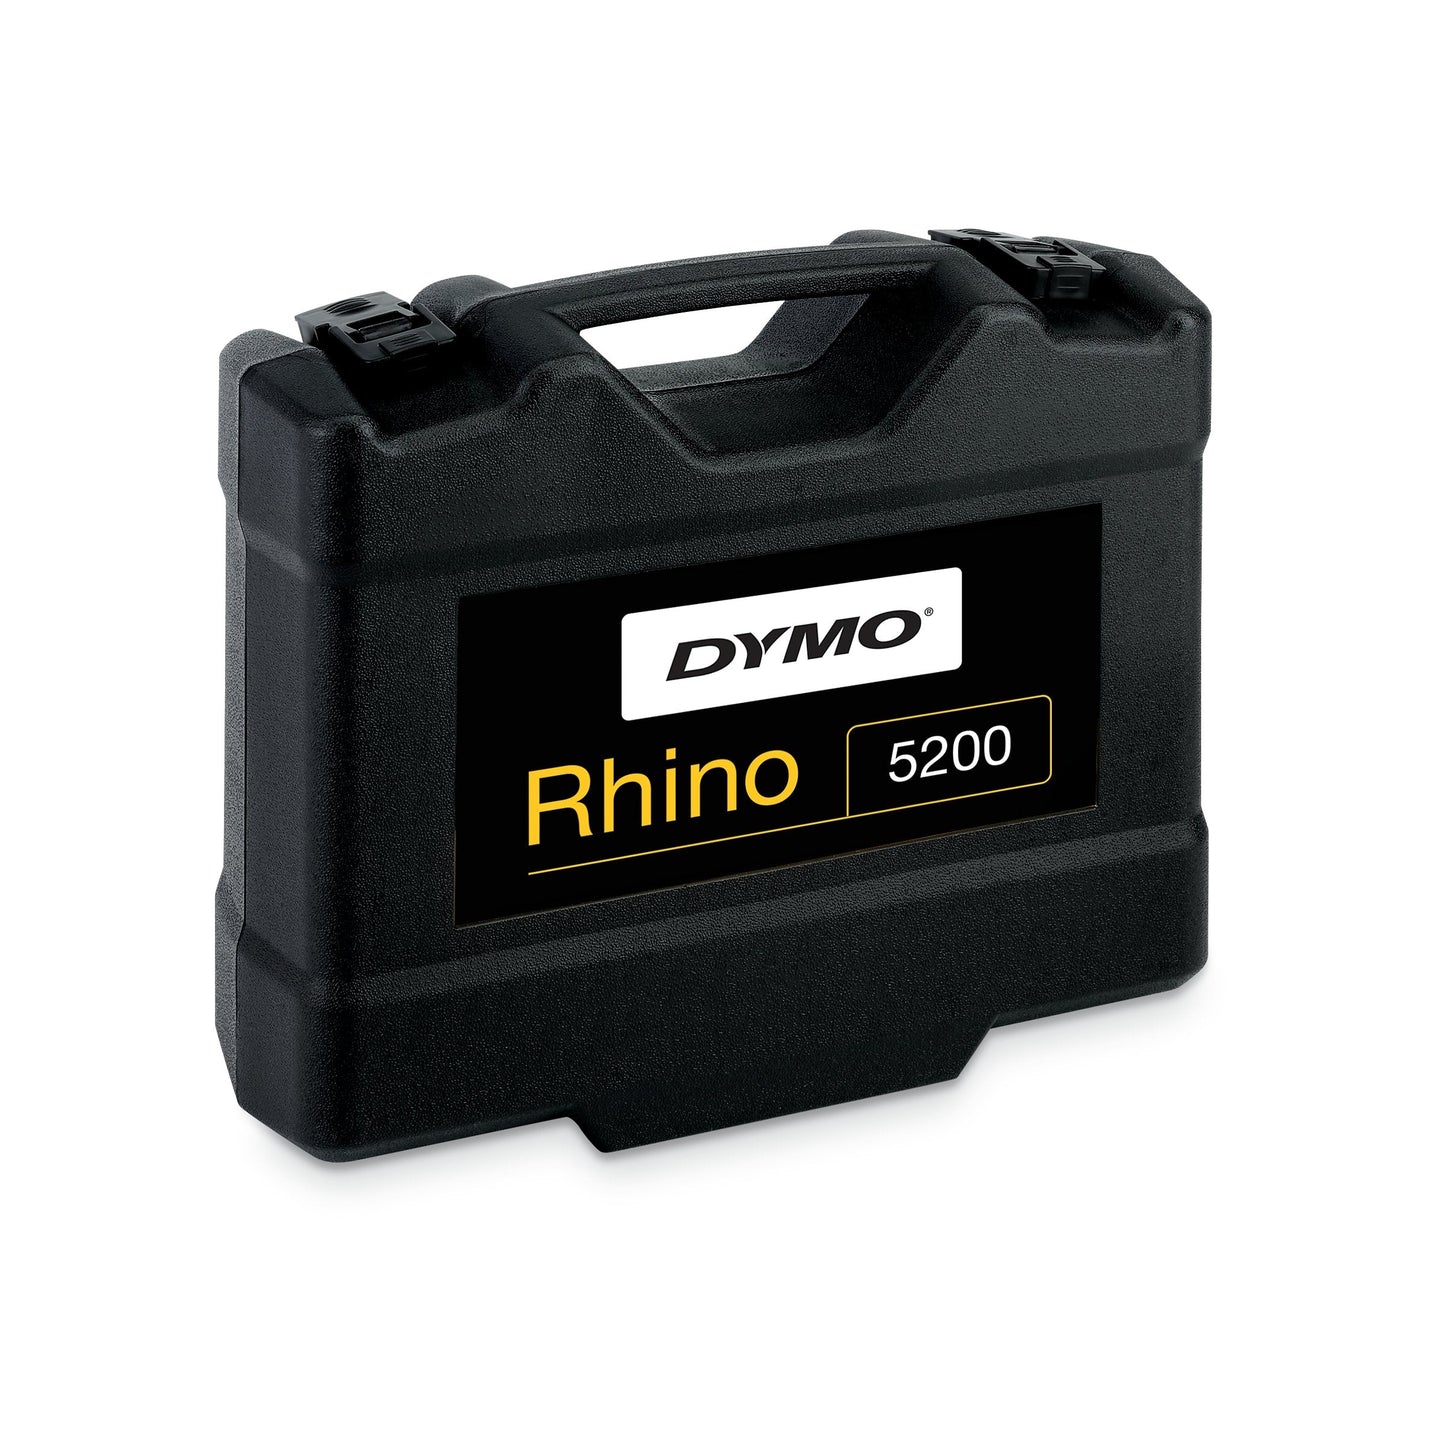 DYMO Rhino 5200 Industrial Label Maker Portable Printer with Carry Case 2 Label Cartridges Rechargeable Battery (1400mAh)